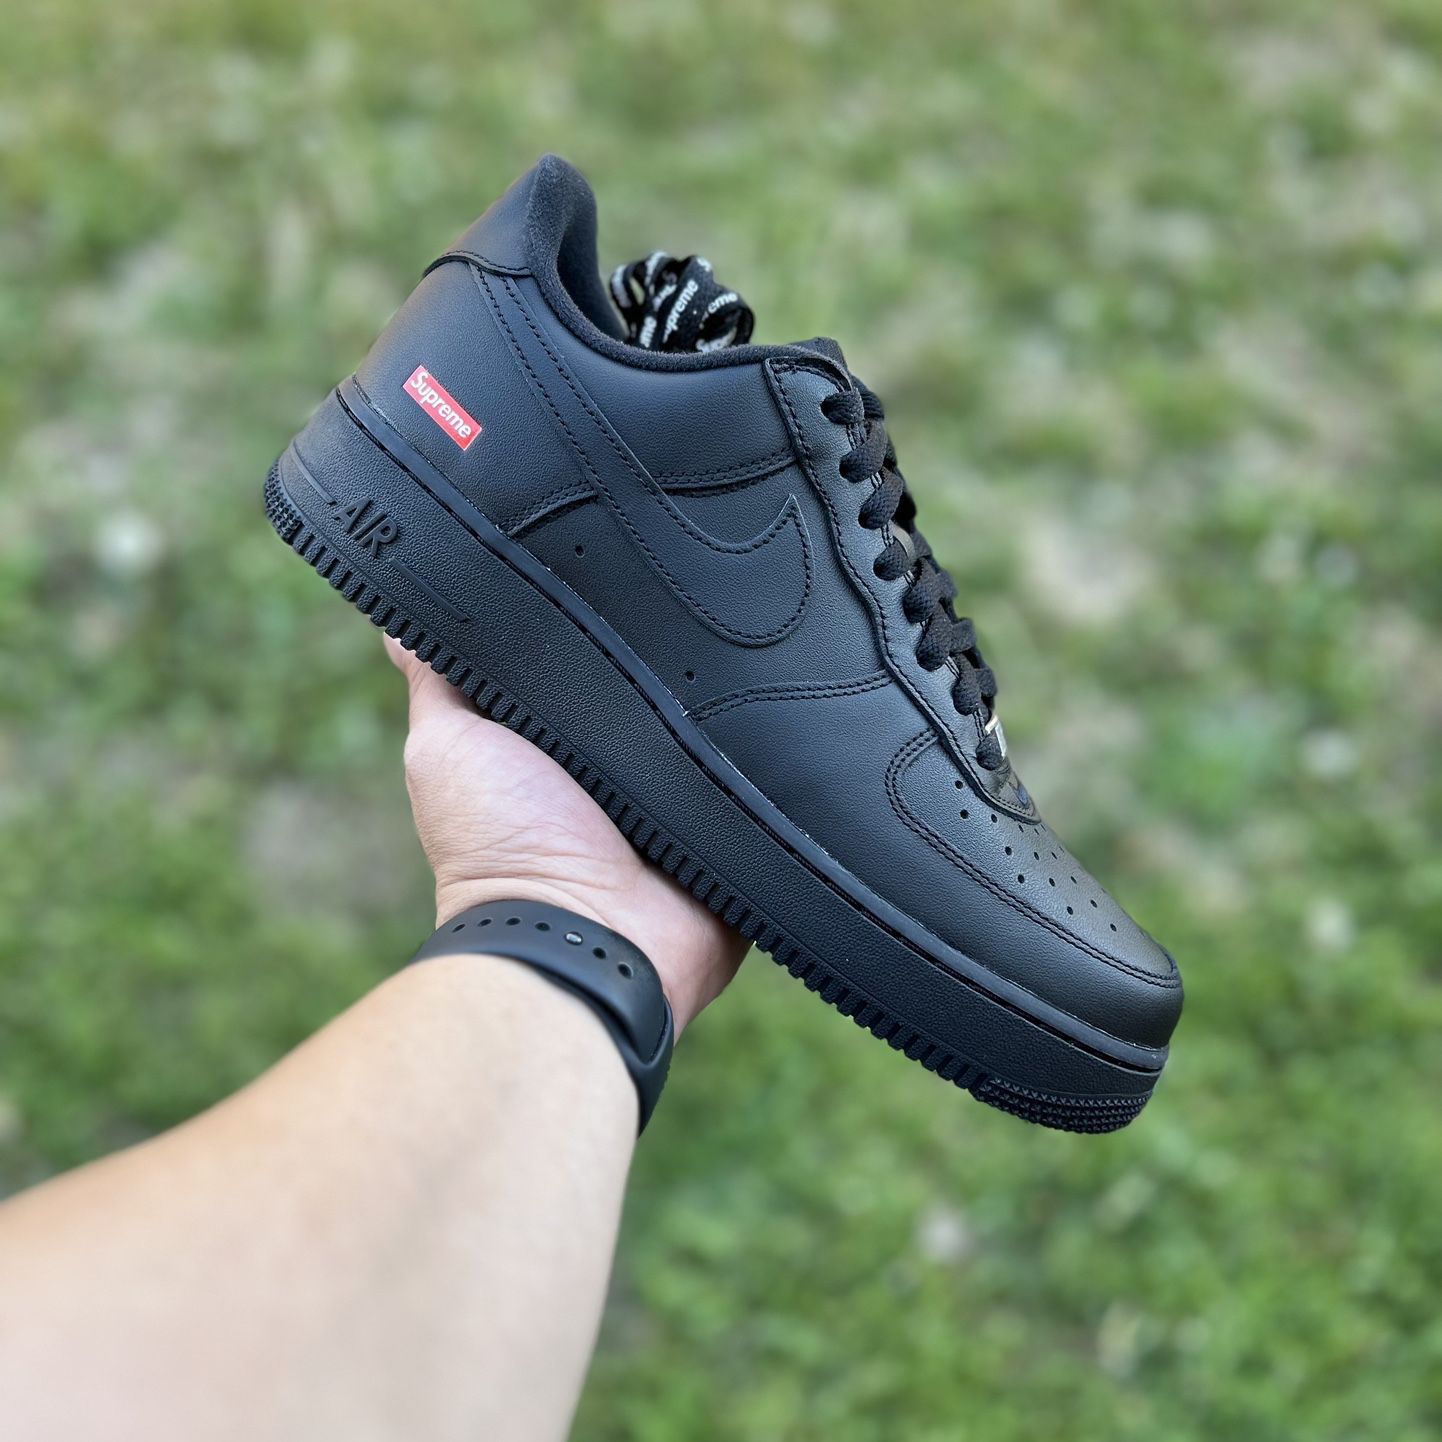 Nike Supreme Air Force 1 Blk Size 9 for Sale in Garland, TX - OfferUp